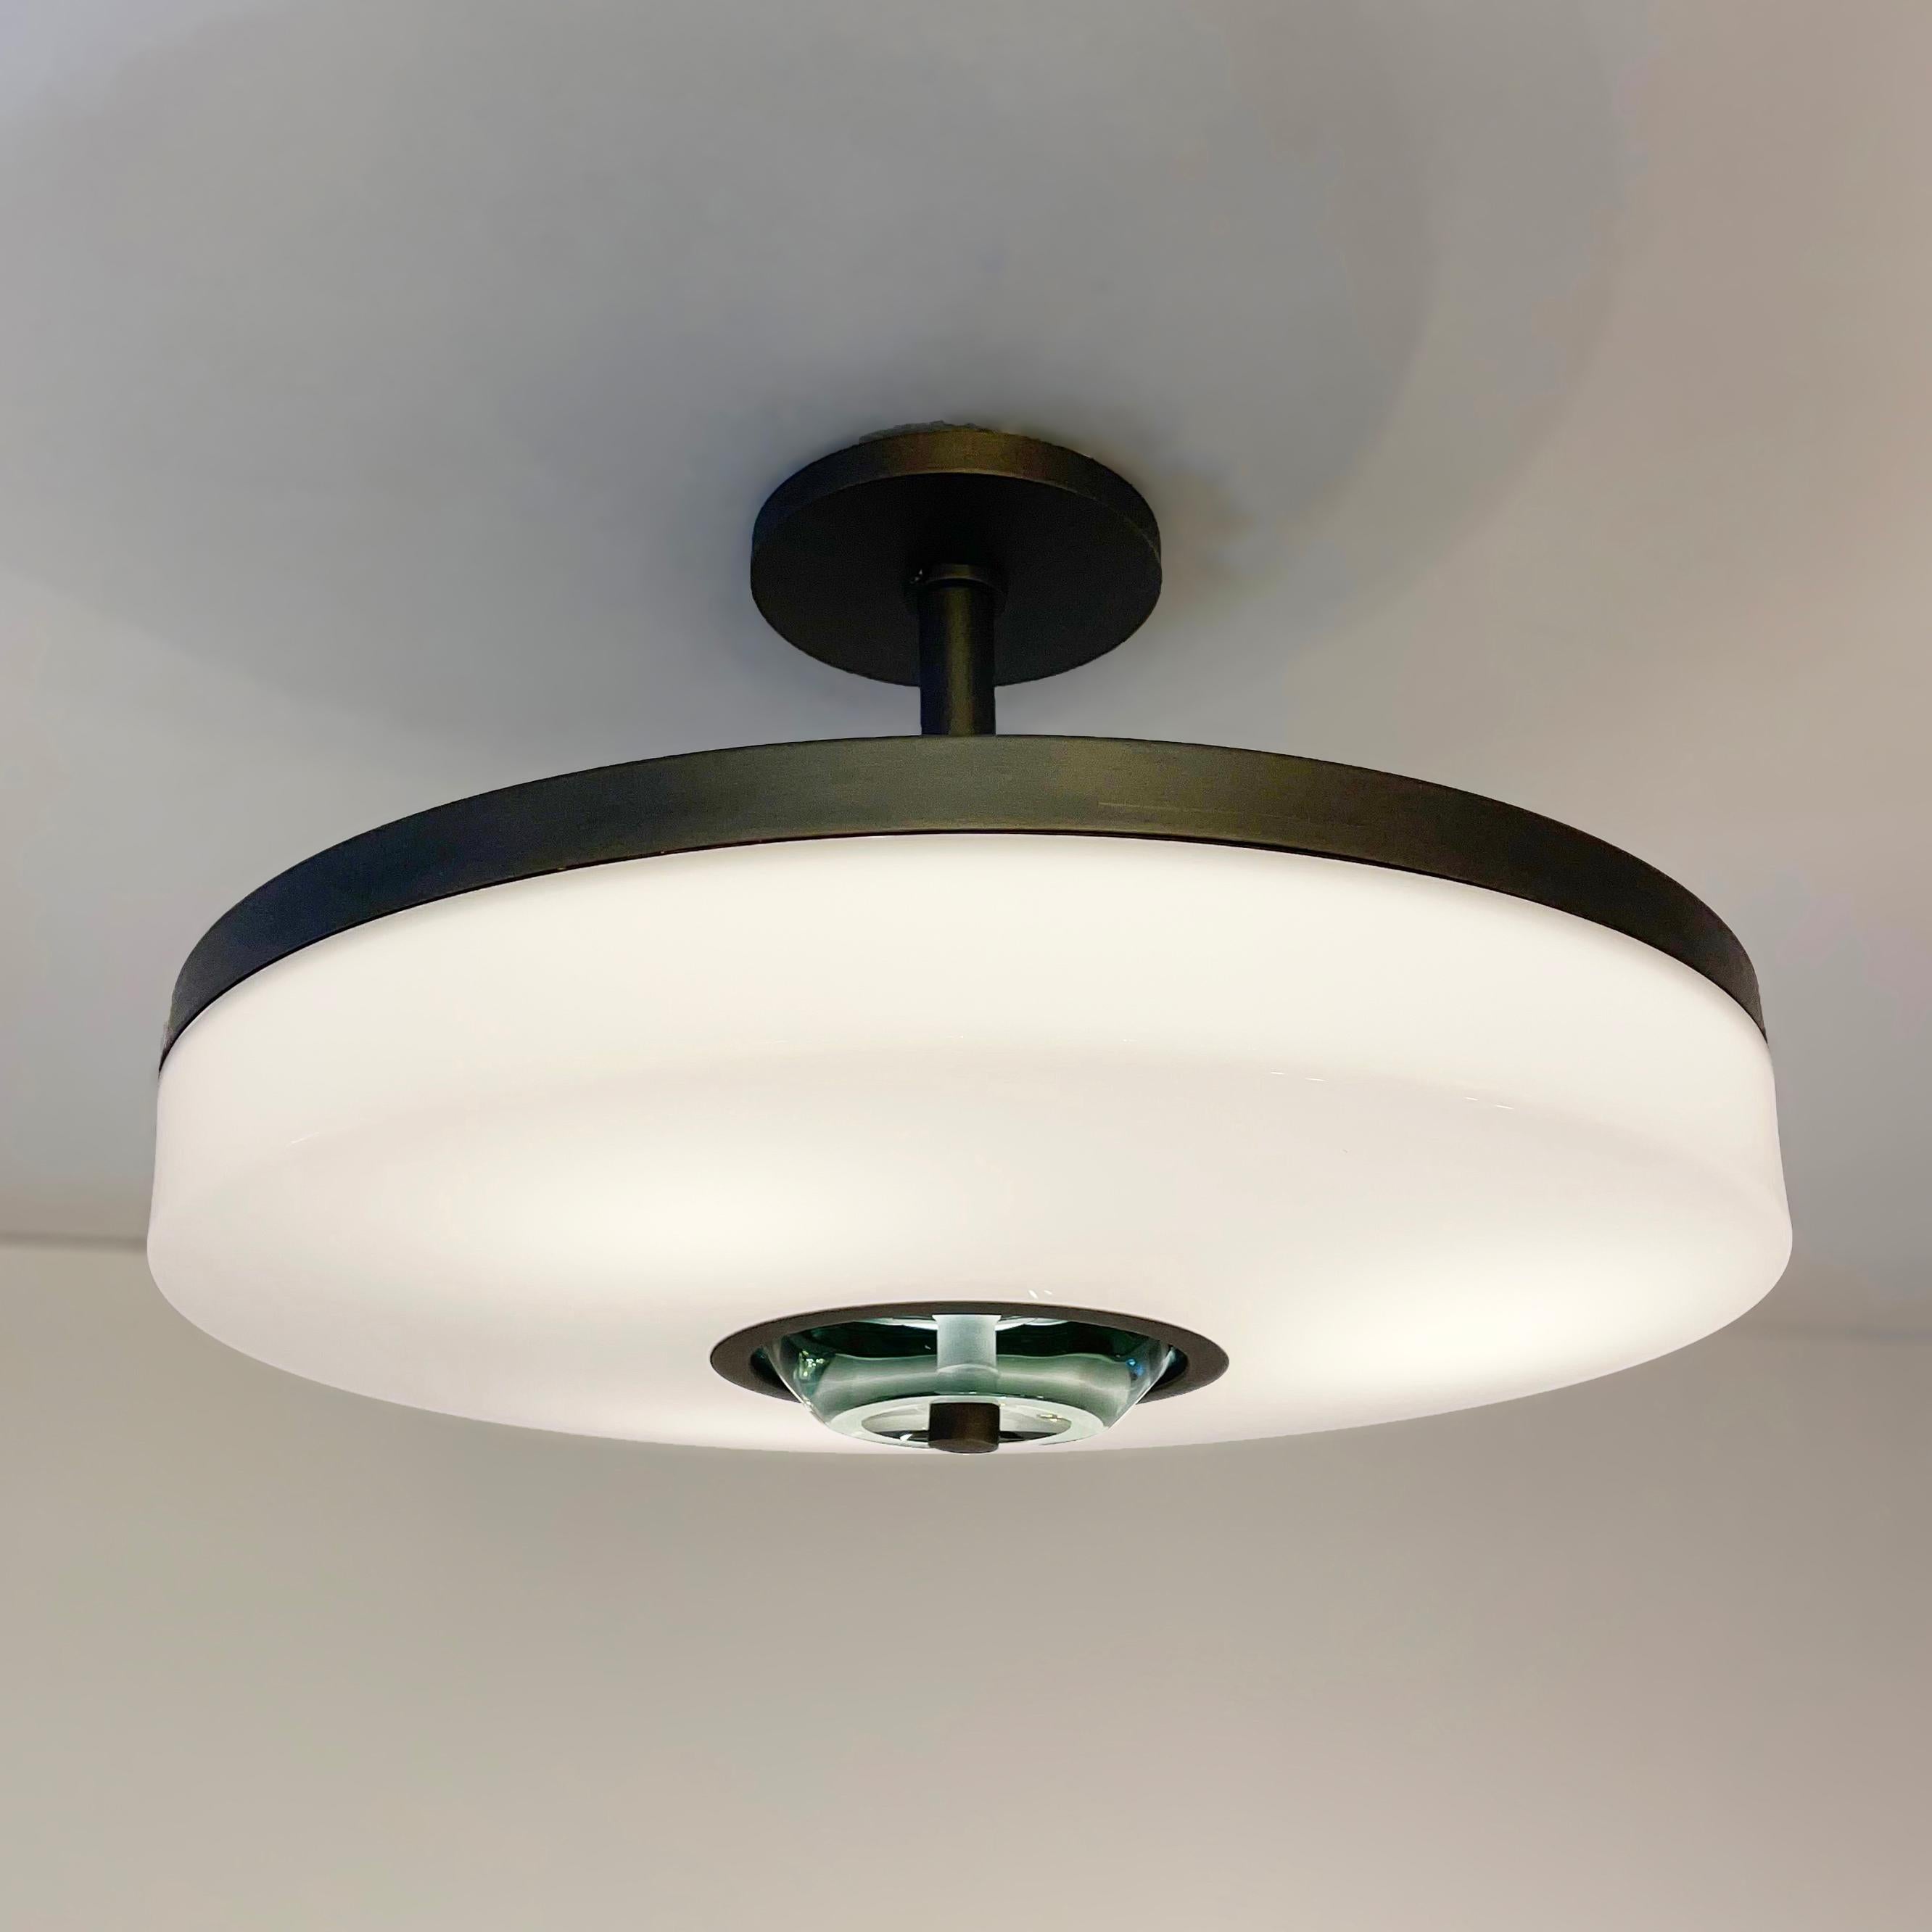 Iris Piccolo Ceiling Light by Gaspare Asaro- Polished Nickel Finish In New Condition For Sale In New York, NY